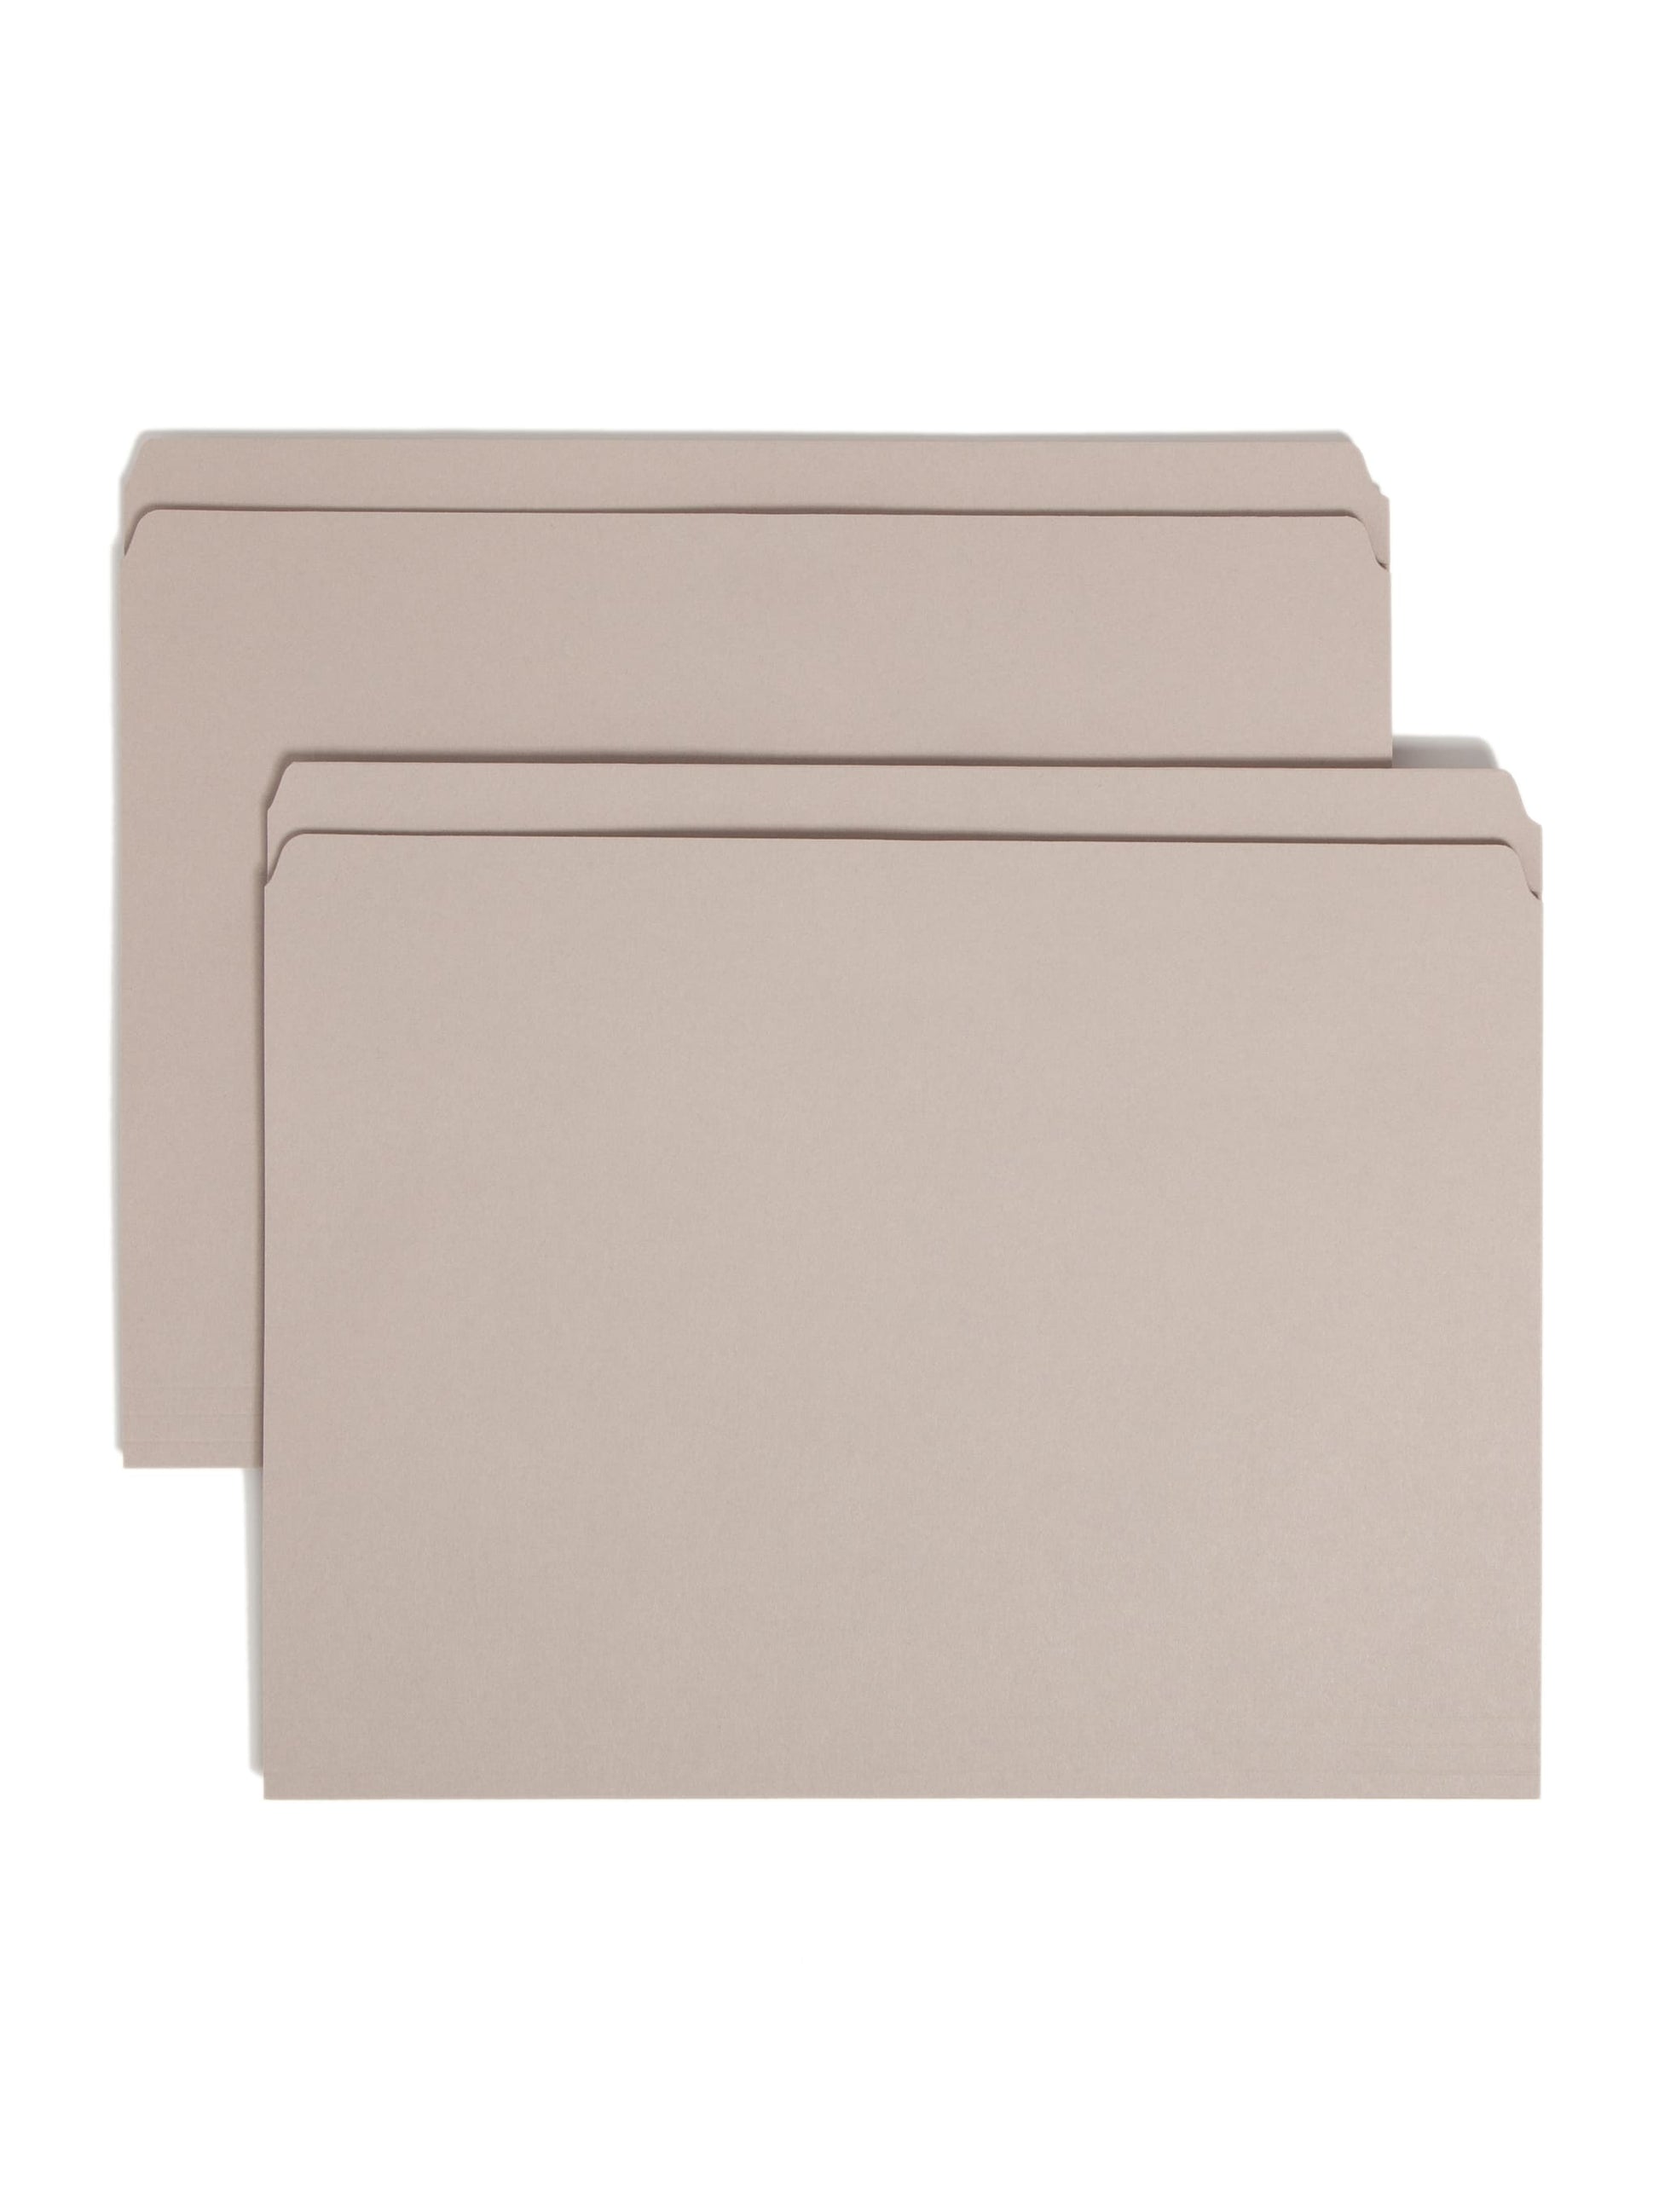 Reinforced Tab File Folders, Straight-Cut Tab, Gray Color, Letter Size, Set of 100, 086486123105